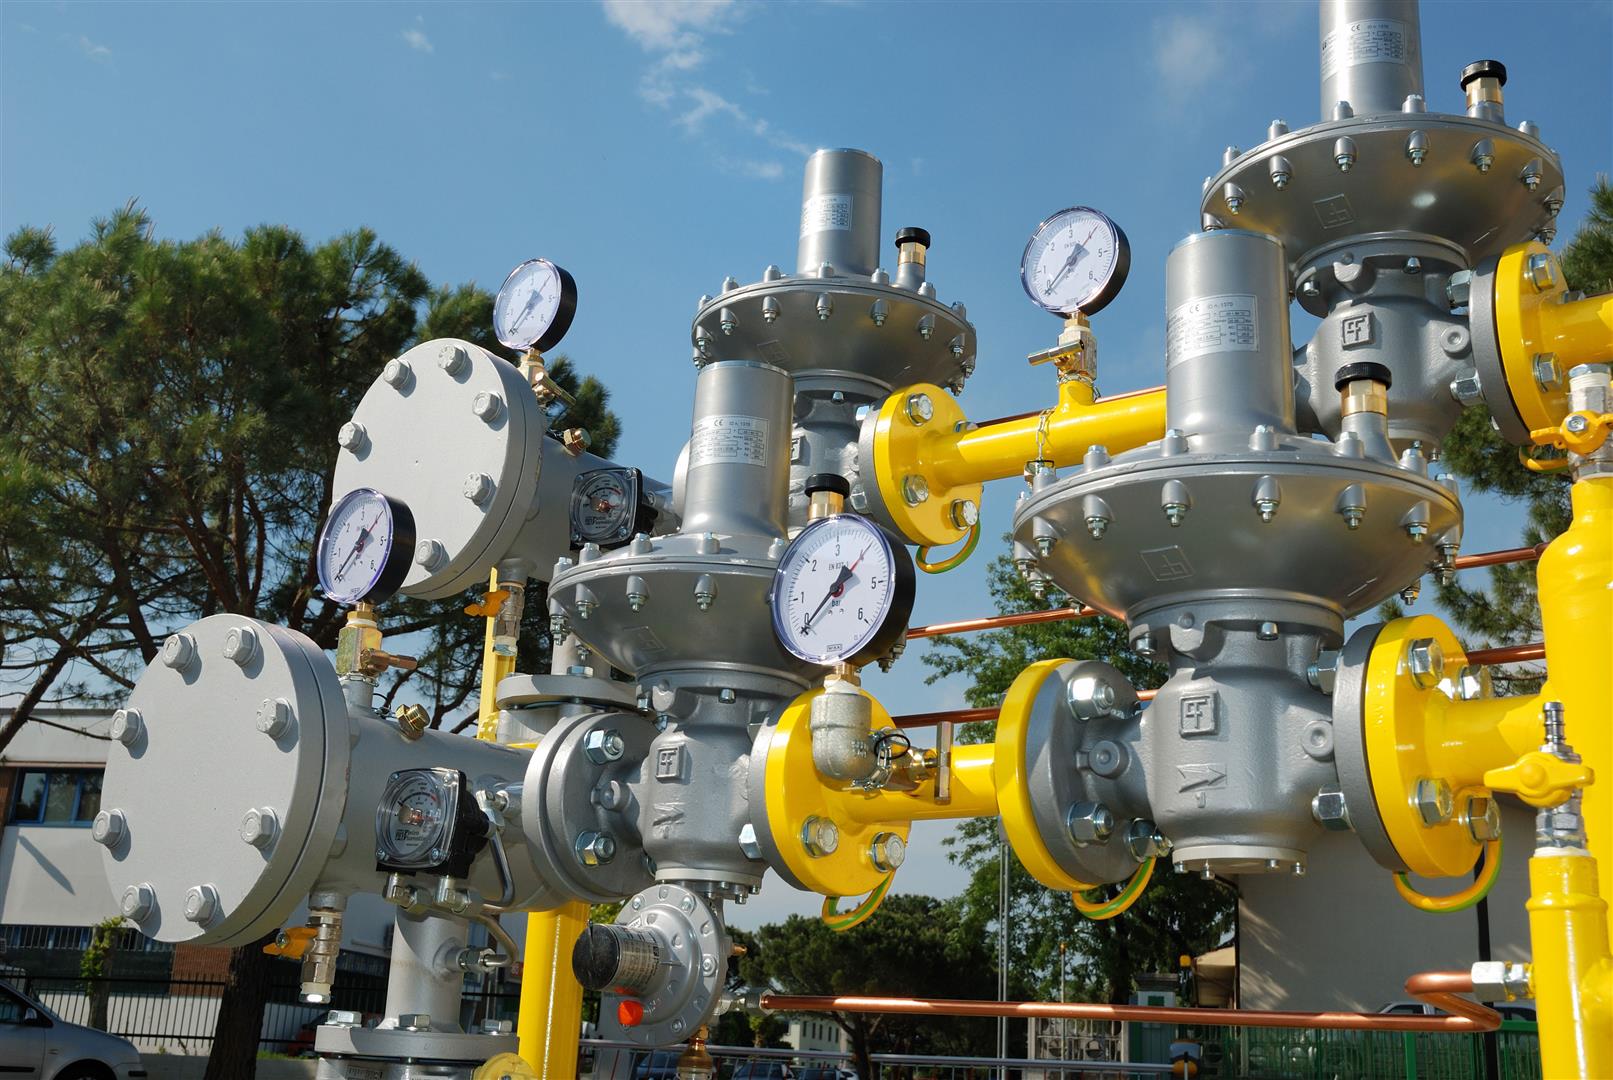 Product, systems and services for the gas industry